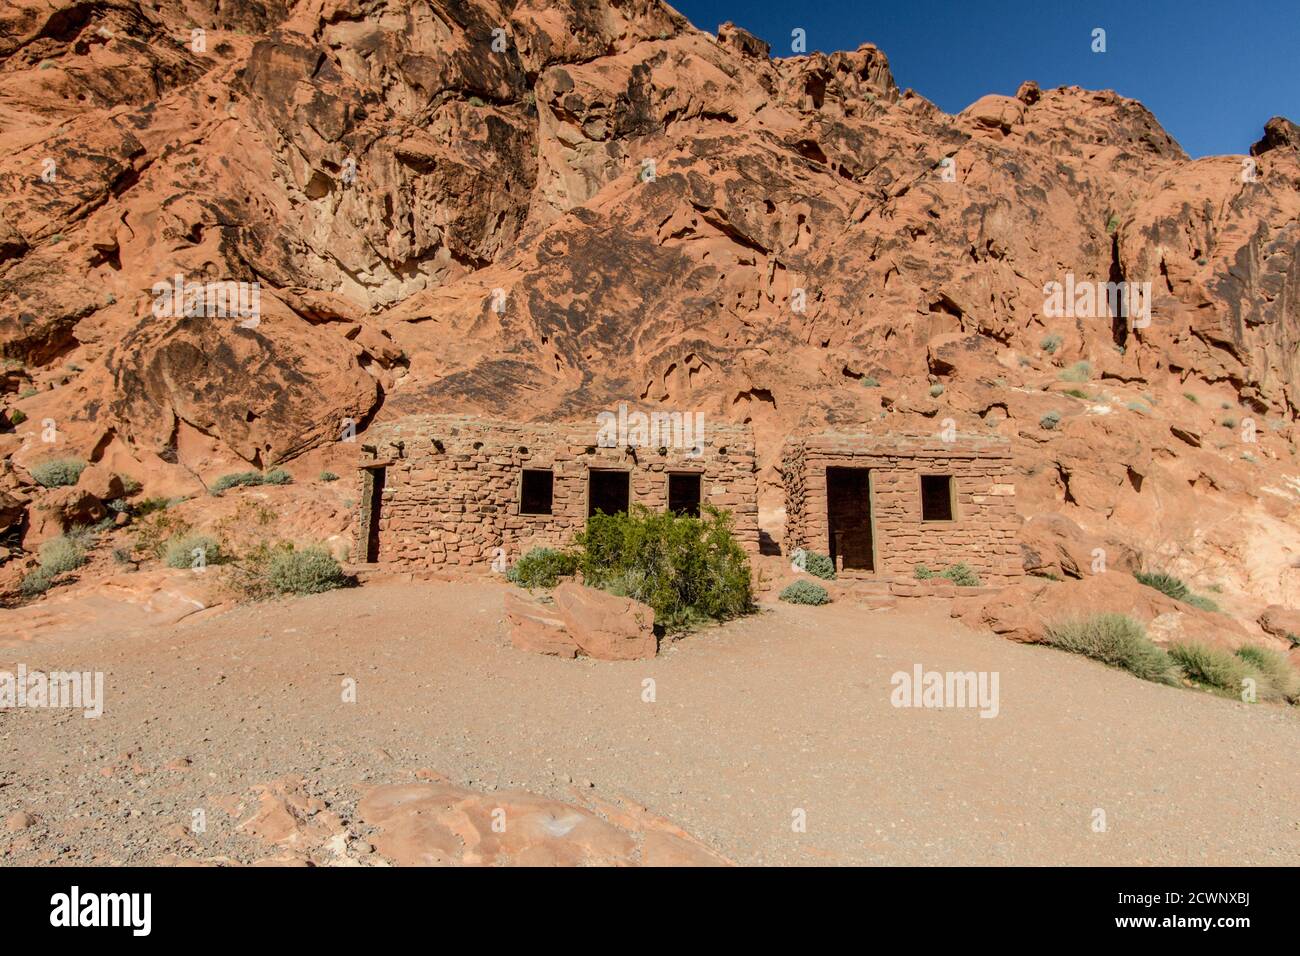 Historic CCC Cabins. Historical Civilian Conservation Corps cabins built in the 1930's by the federal government at the Valley Of Fire State Park. Stock Photo